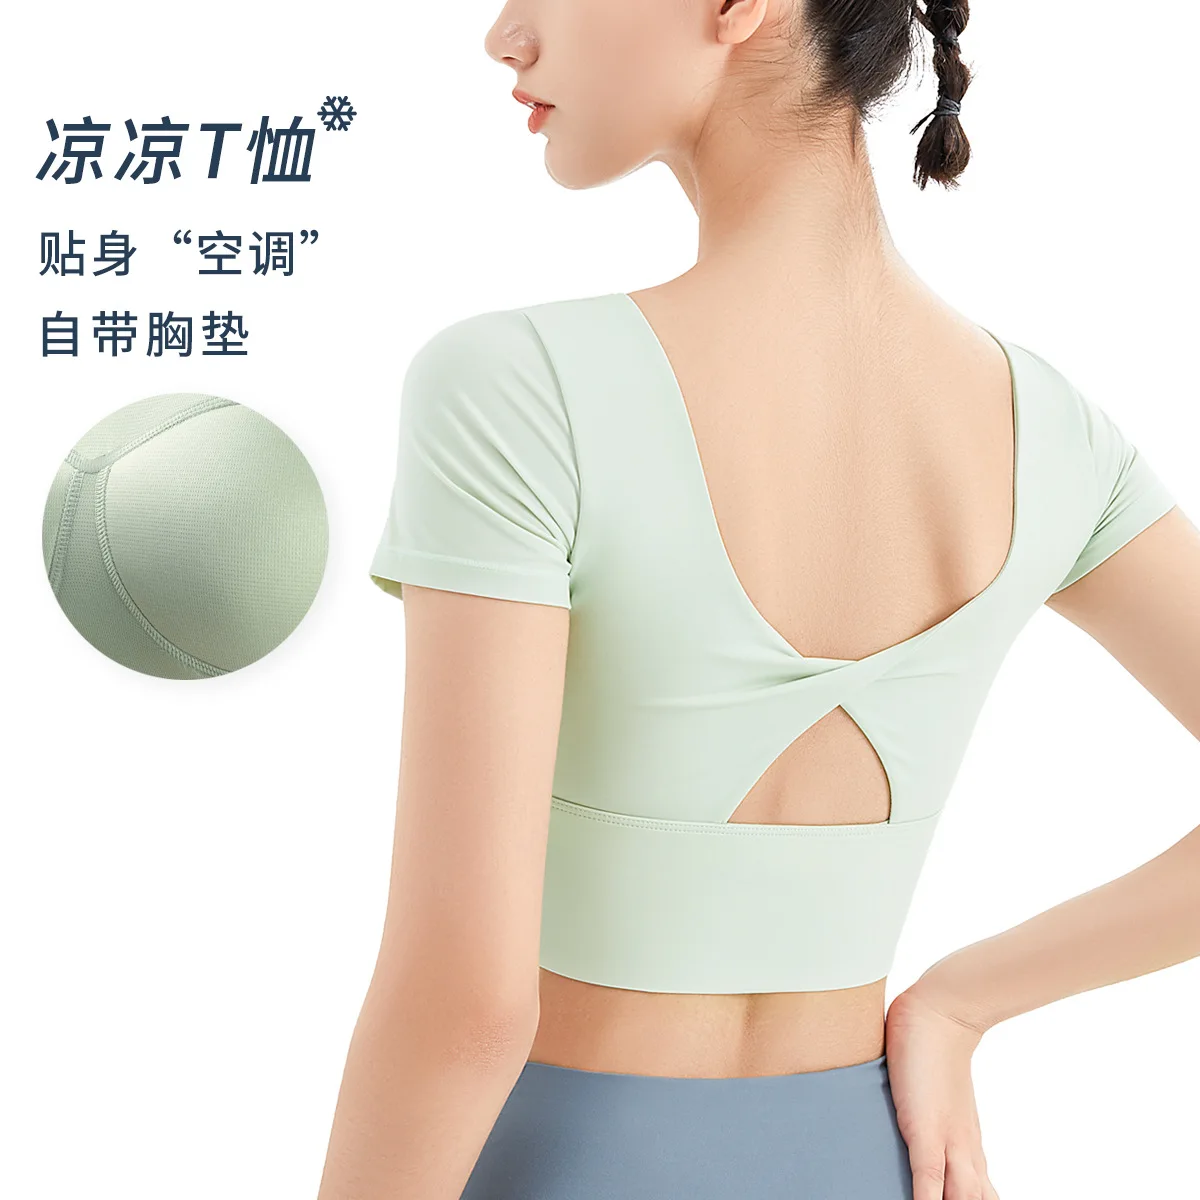 New spring running sports vest women with chest pad yoga clothes top running short-sleeved fitness vest